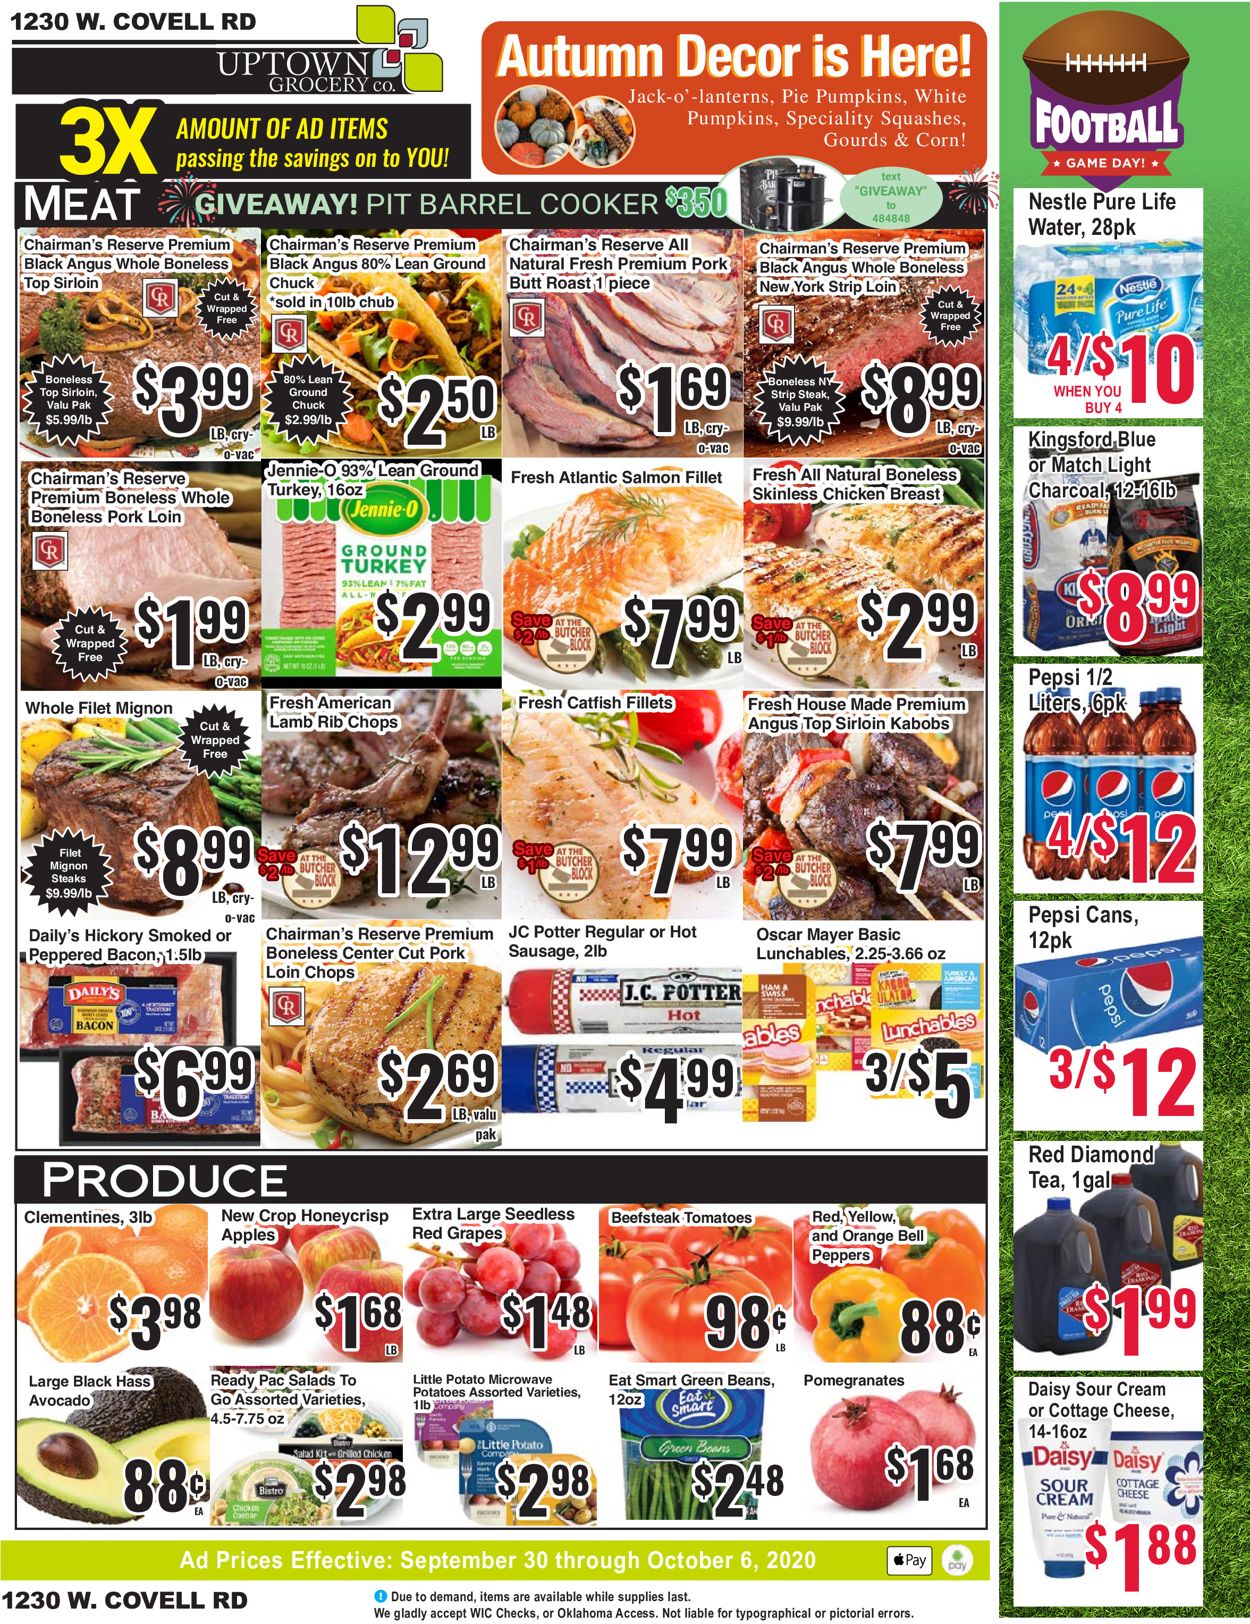 Uptown Grocery Co. Weekly Ad Circular - valid 09/30-10/06/2020